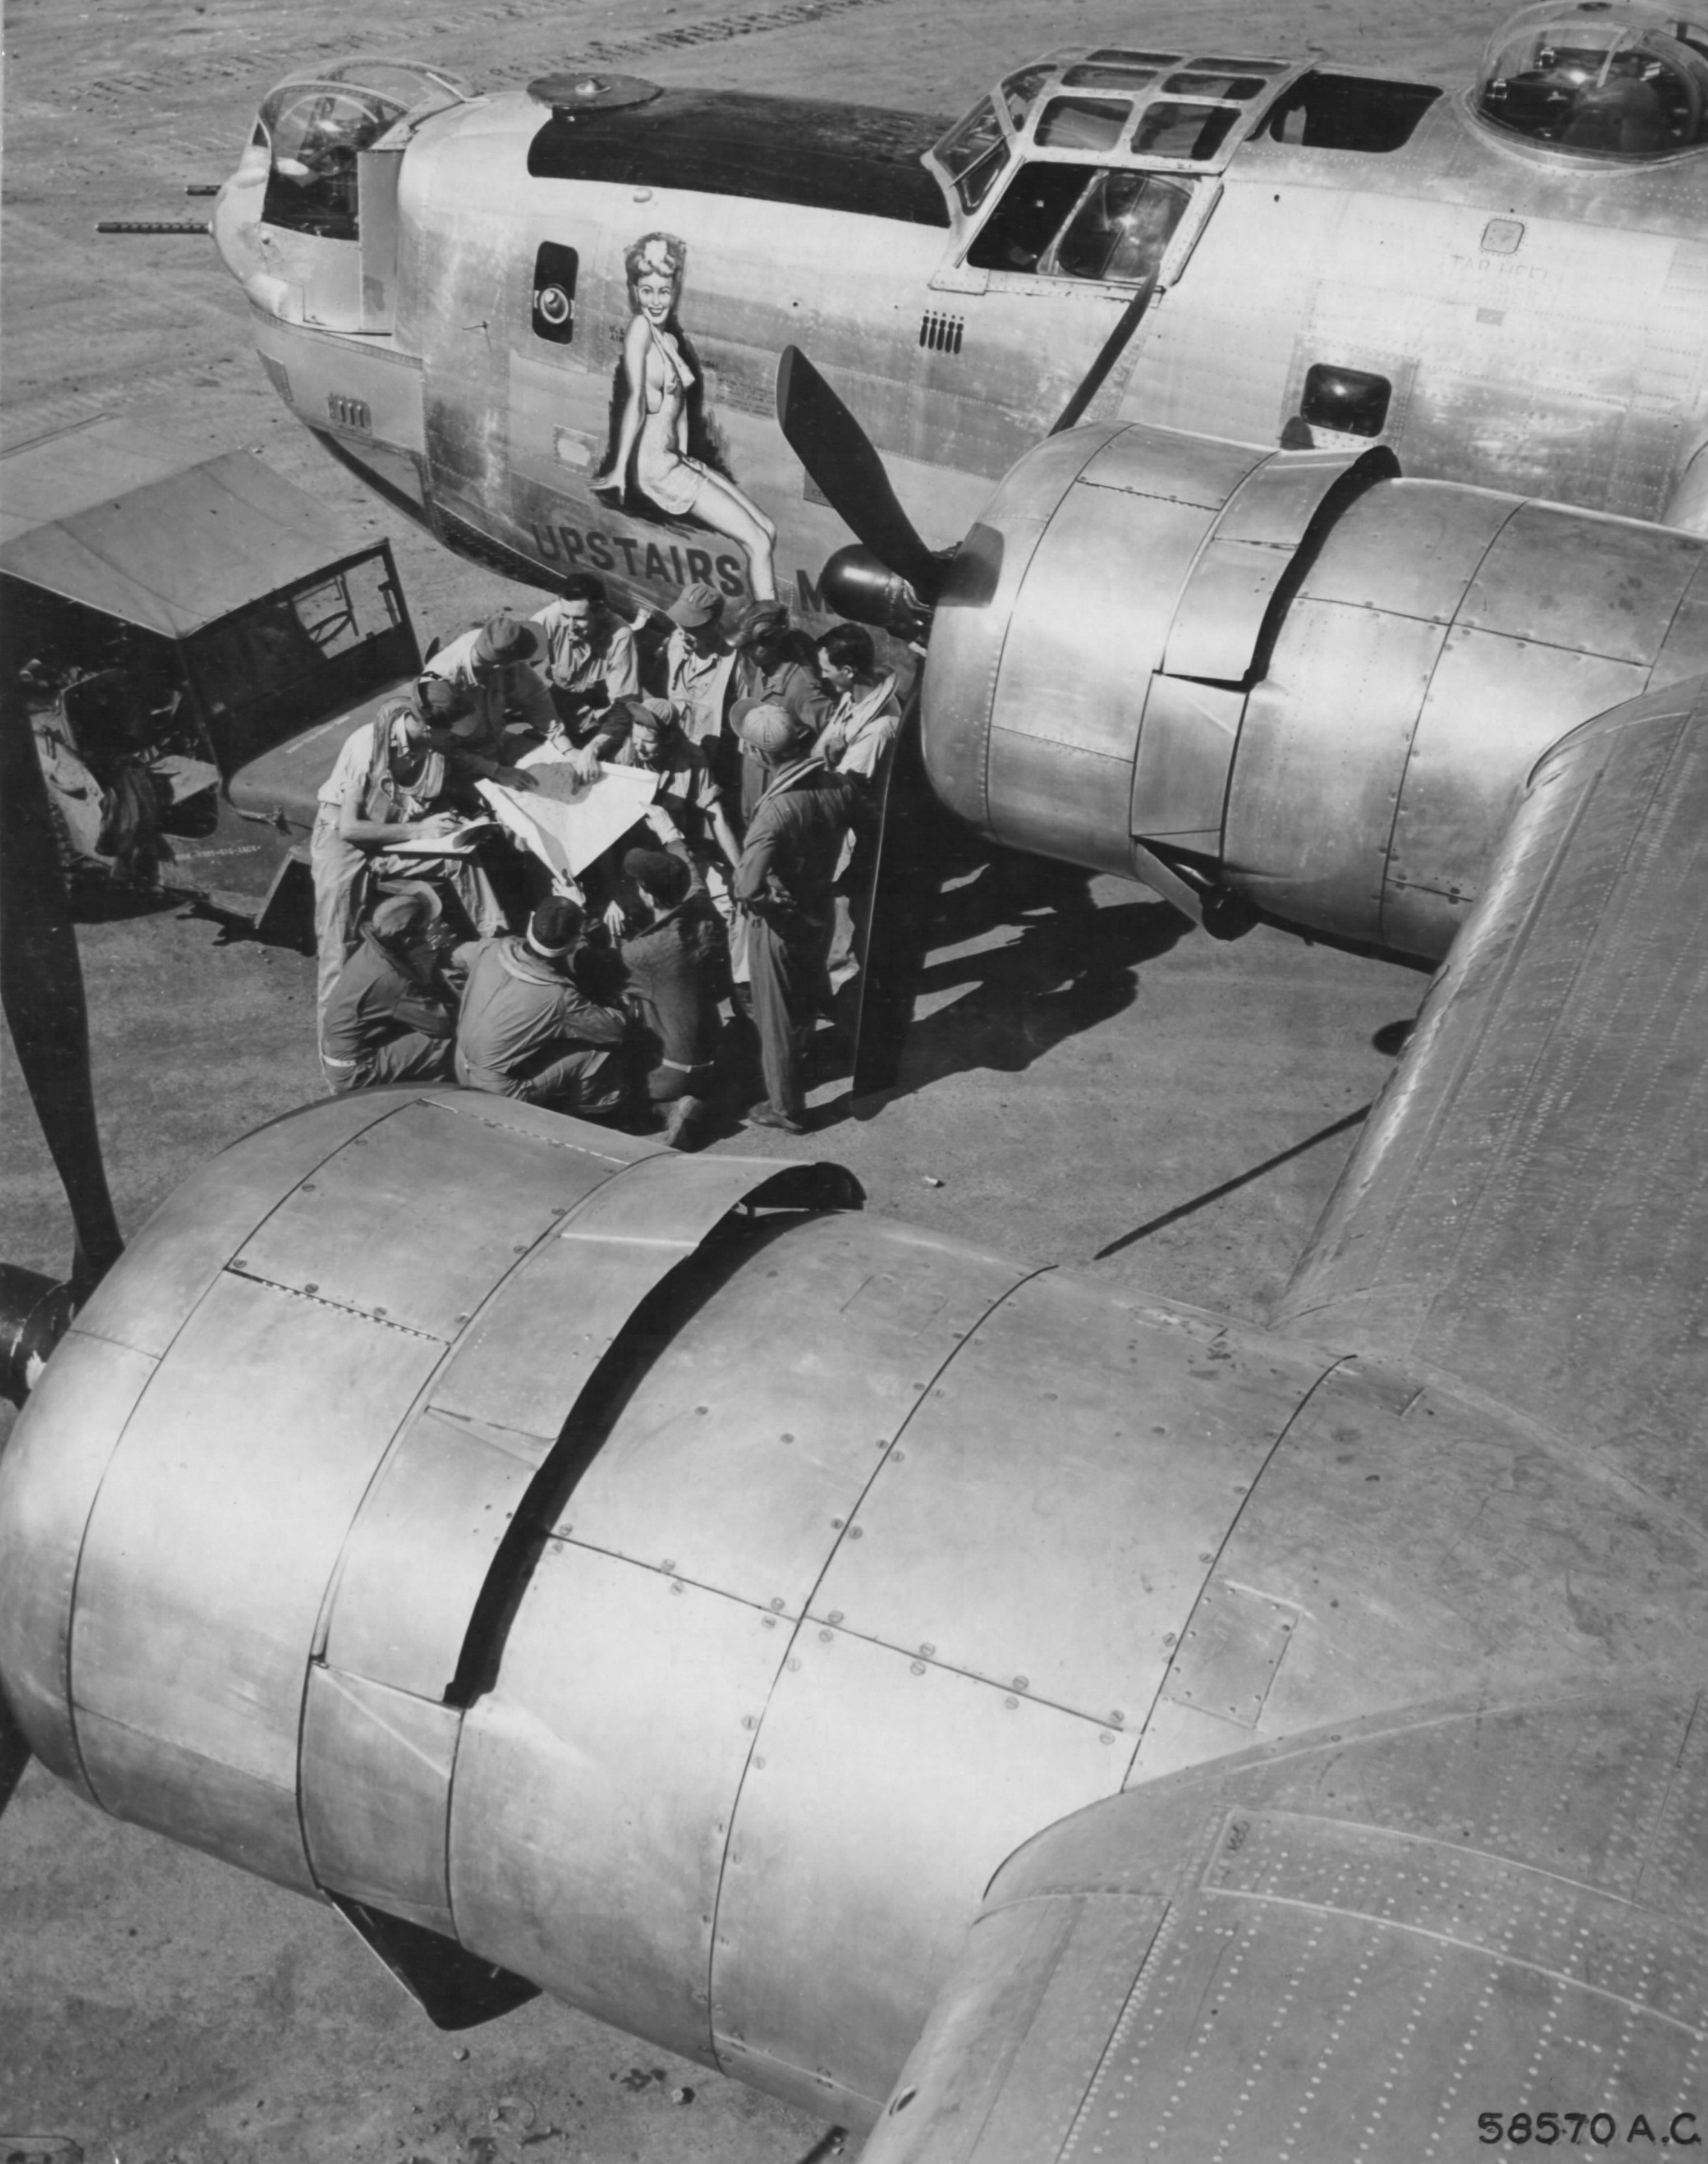 Crew of B-24J Liberator bomber 'Upstairs Maid' being briefed before a mission, Saipan, Mariana Islands, 1945